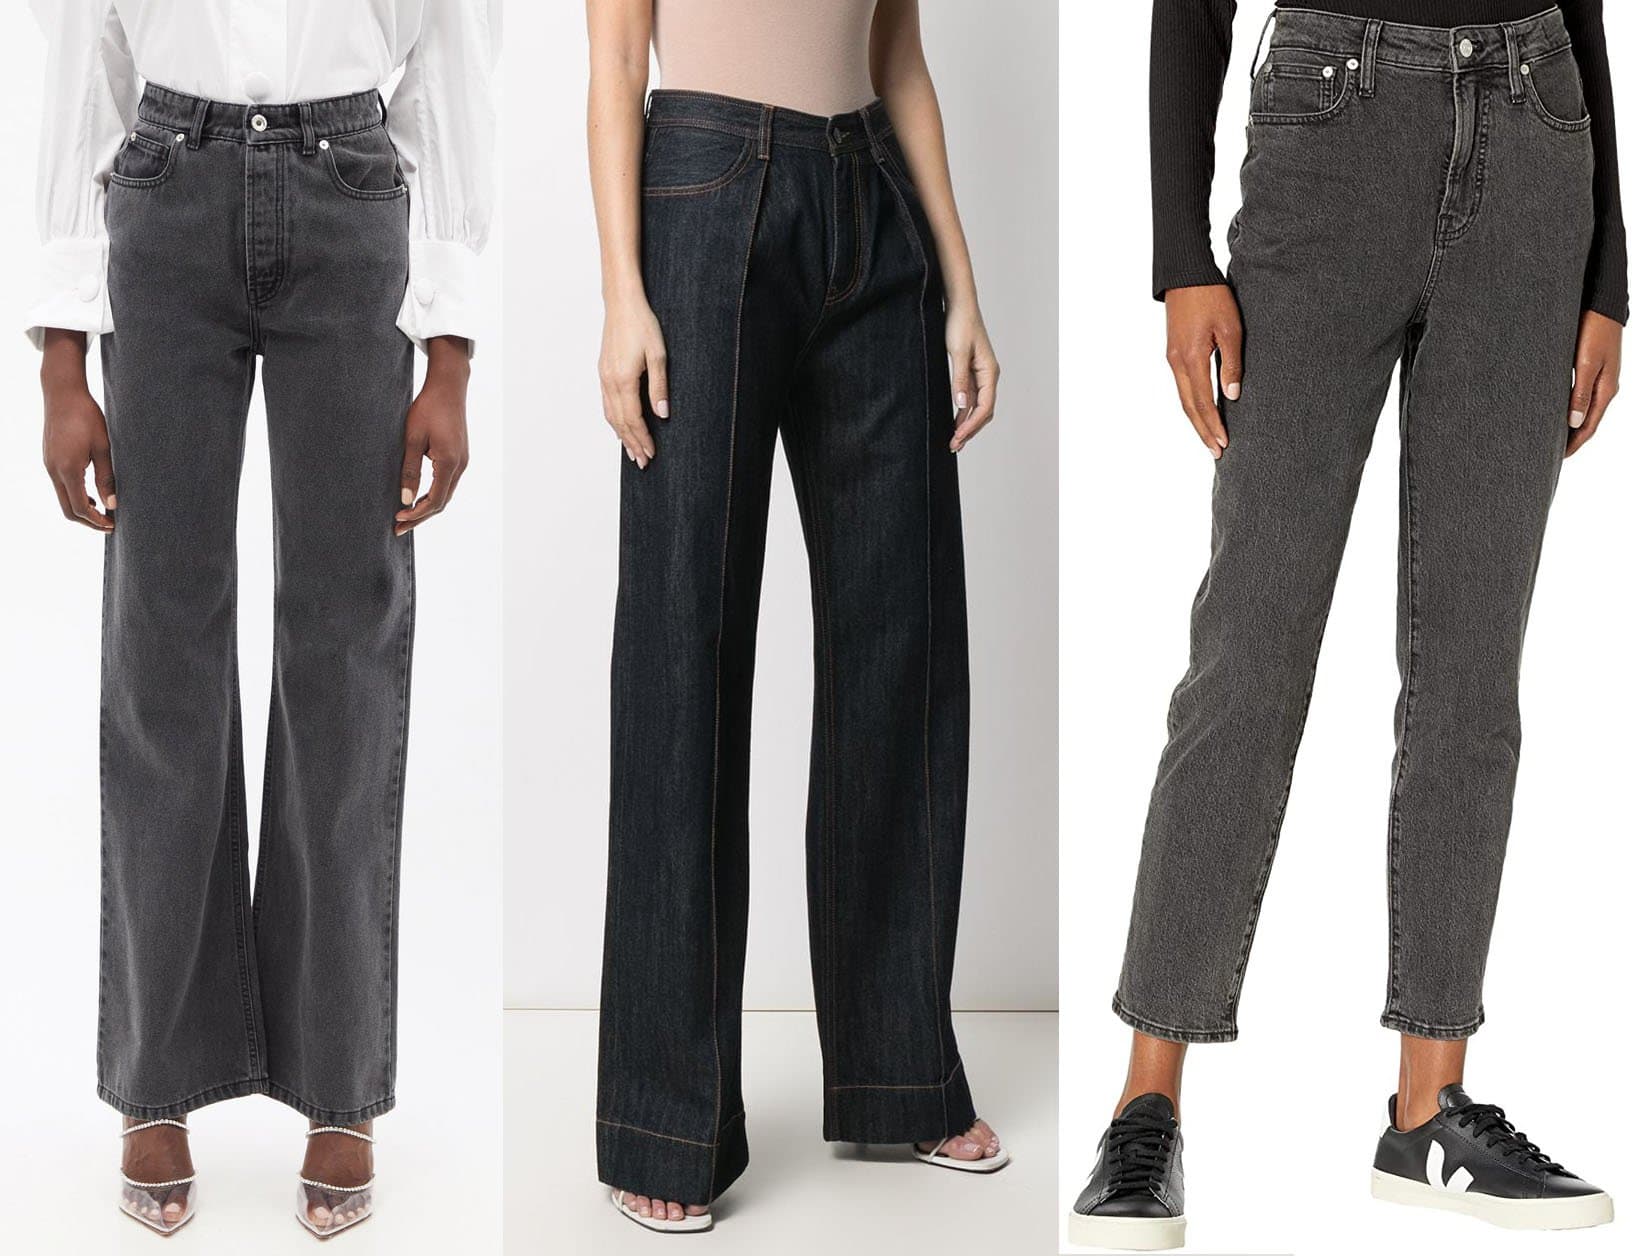 Chic and Comfortable: Highlighting Paco Rabanne's High-Rise Flared Jeans, Ports 1961's Dark-Wash Flares, and Madewell's Curvy Perfect Vintage Jeans for a blend of style and comfort